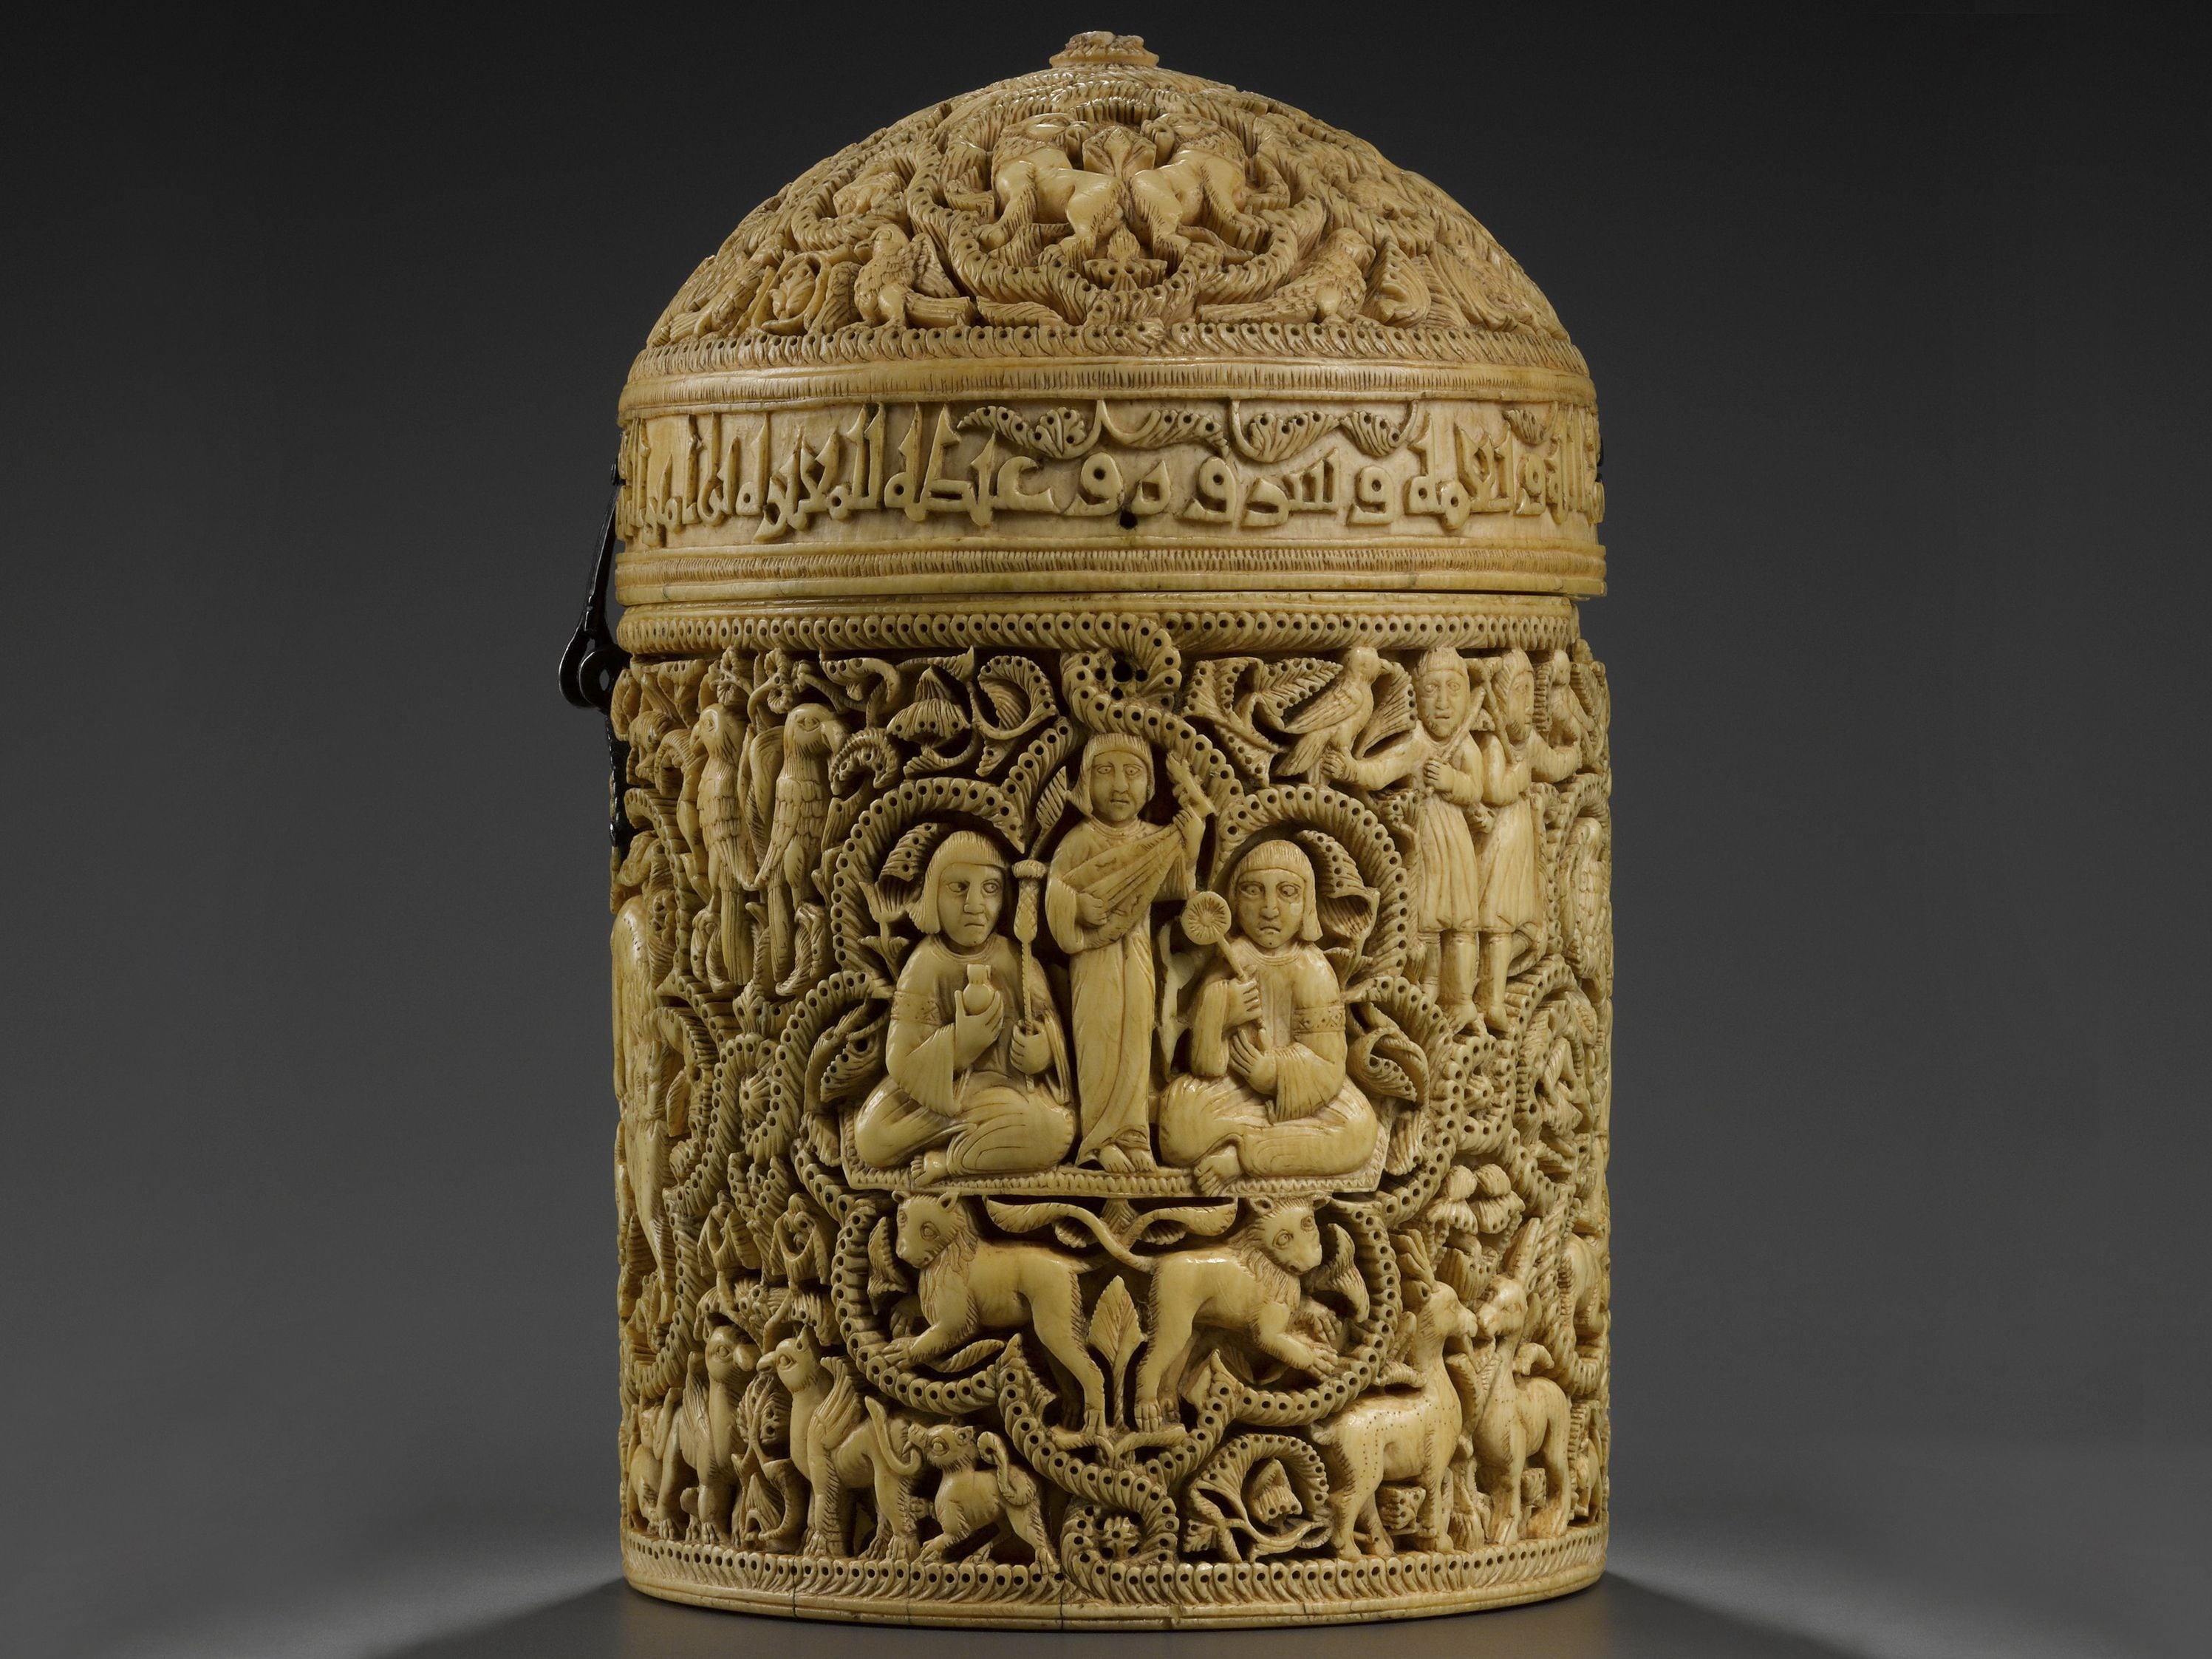 louvre abu dhabi's new exhibitions and loans, from a 10th-century pyxis to african royalty